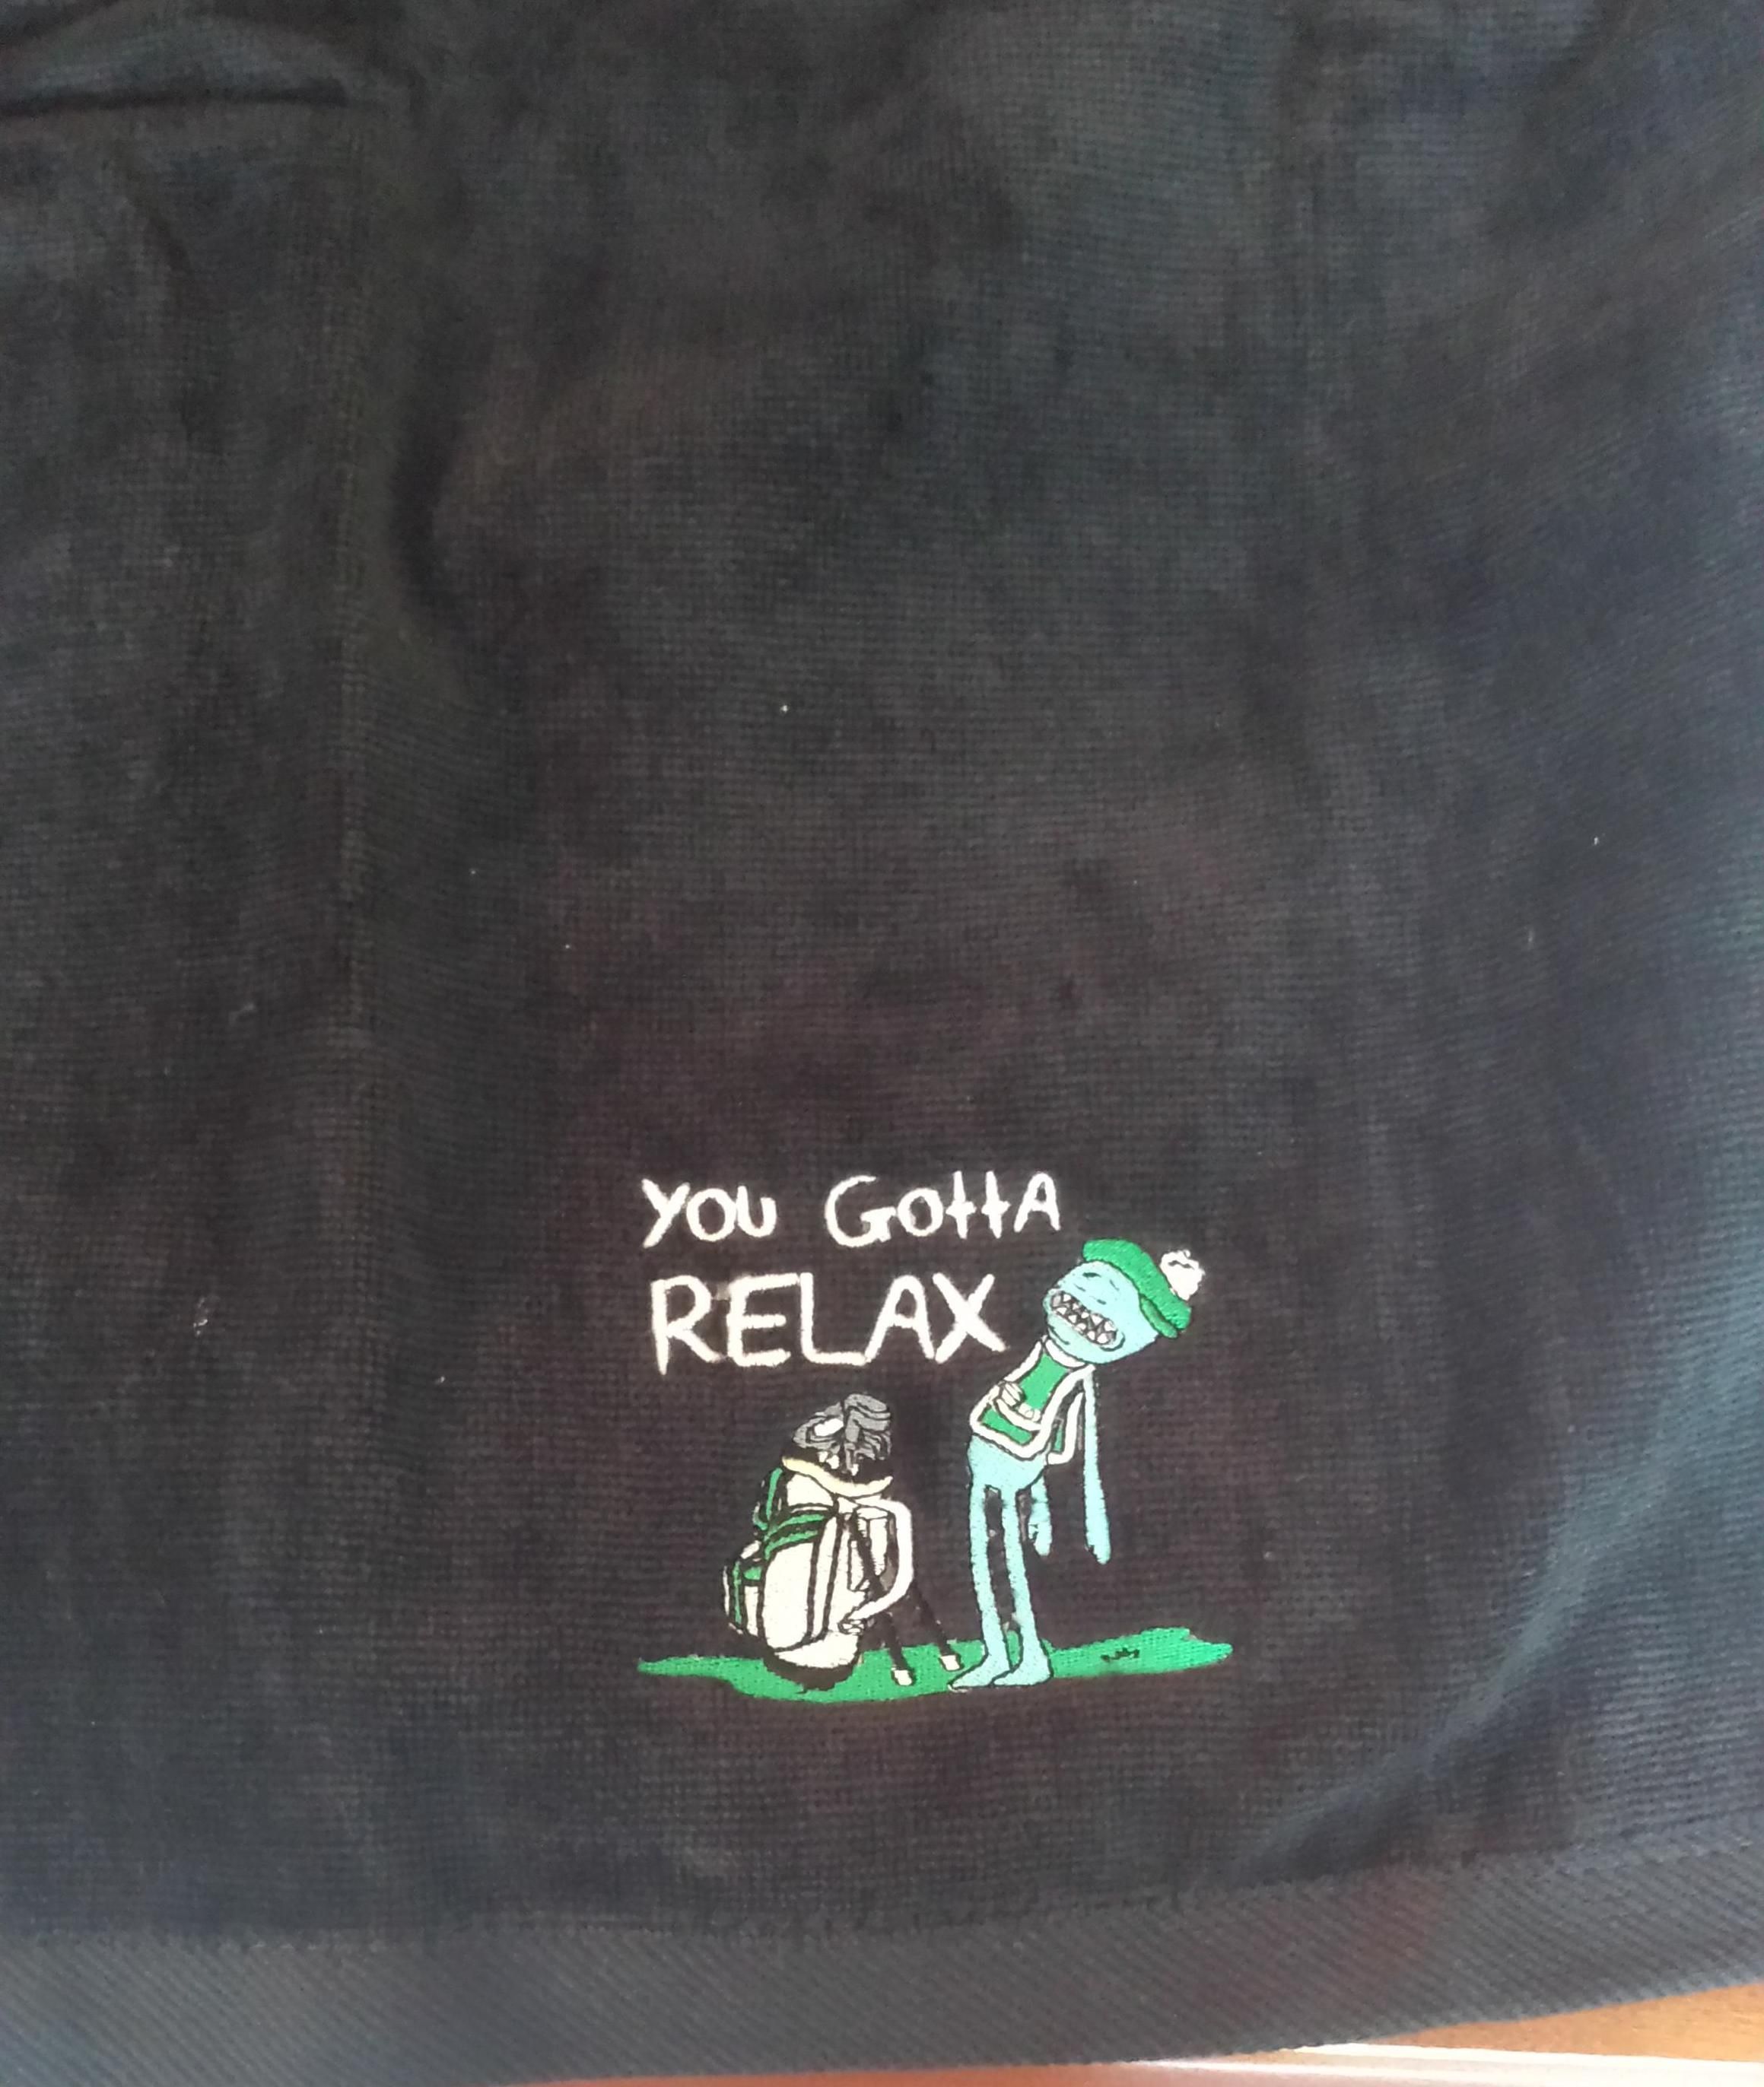 My new golf towel came in.